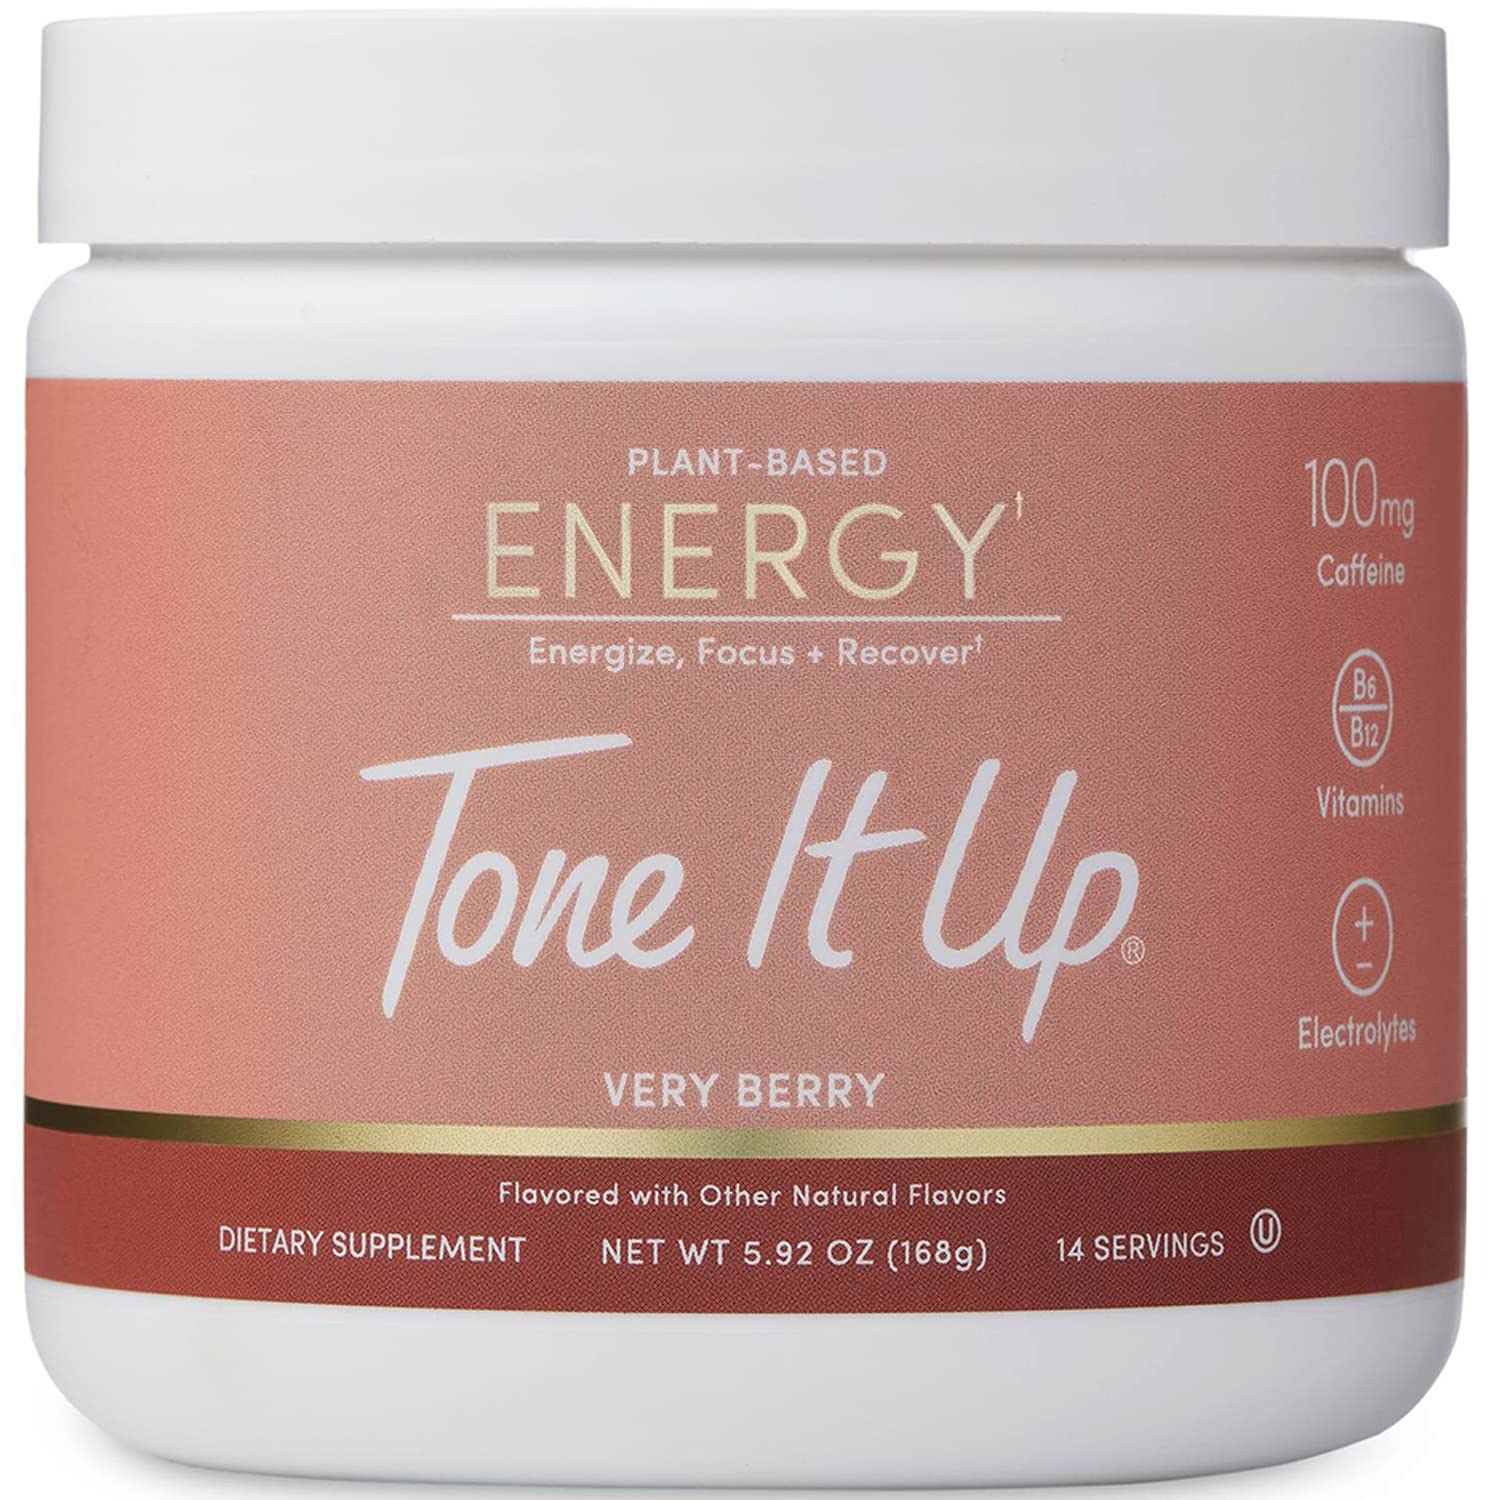 Tone It Up Energy Booster - Pre Workout Powder for Women - 14 Servings - Caffeine and Provides Energy and Focus - Non-Dairy Free, Non-GMO - Very Berry -